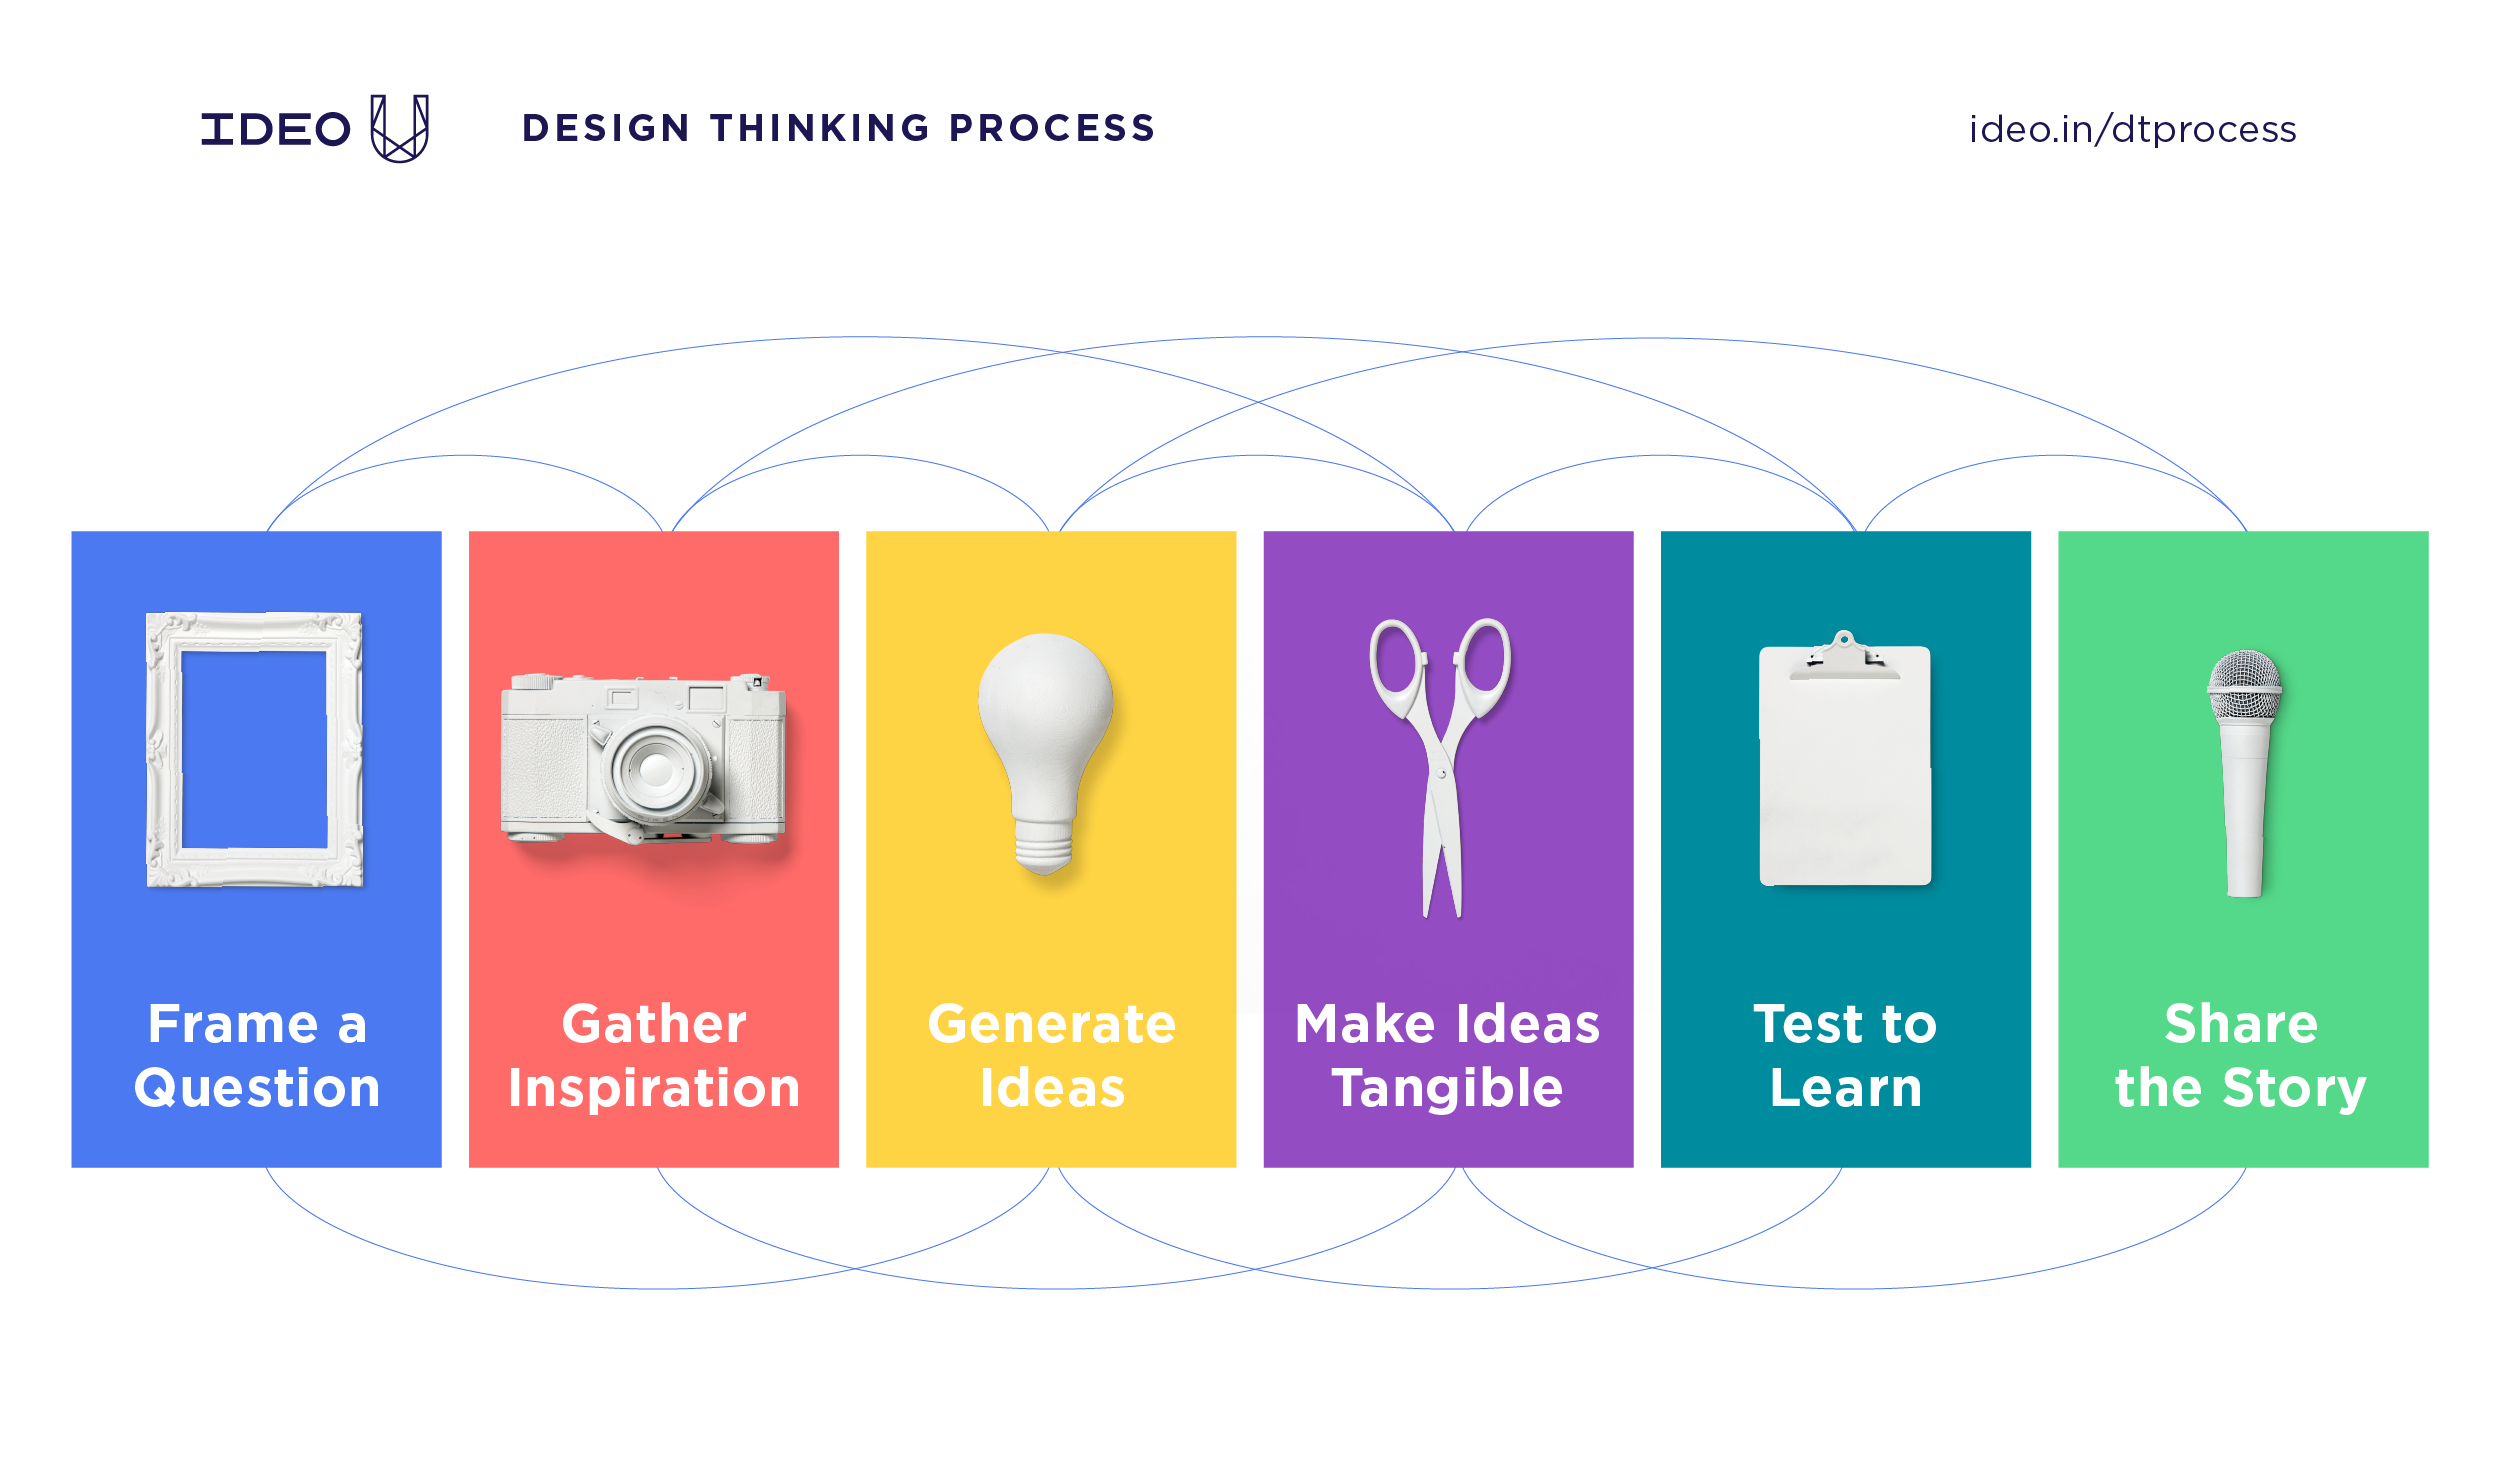 What Is Empathy and Why Is It So Important in Design Thinking?